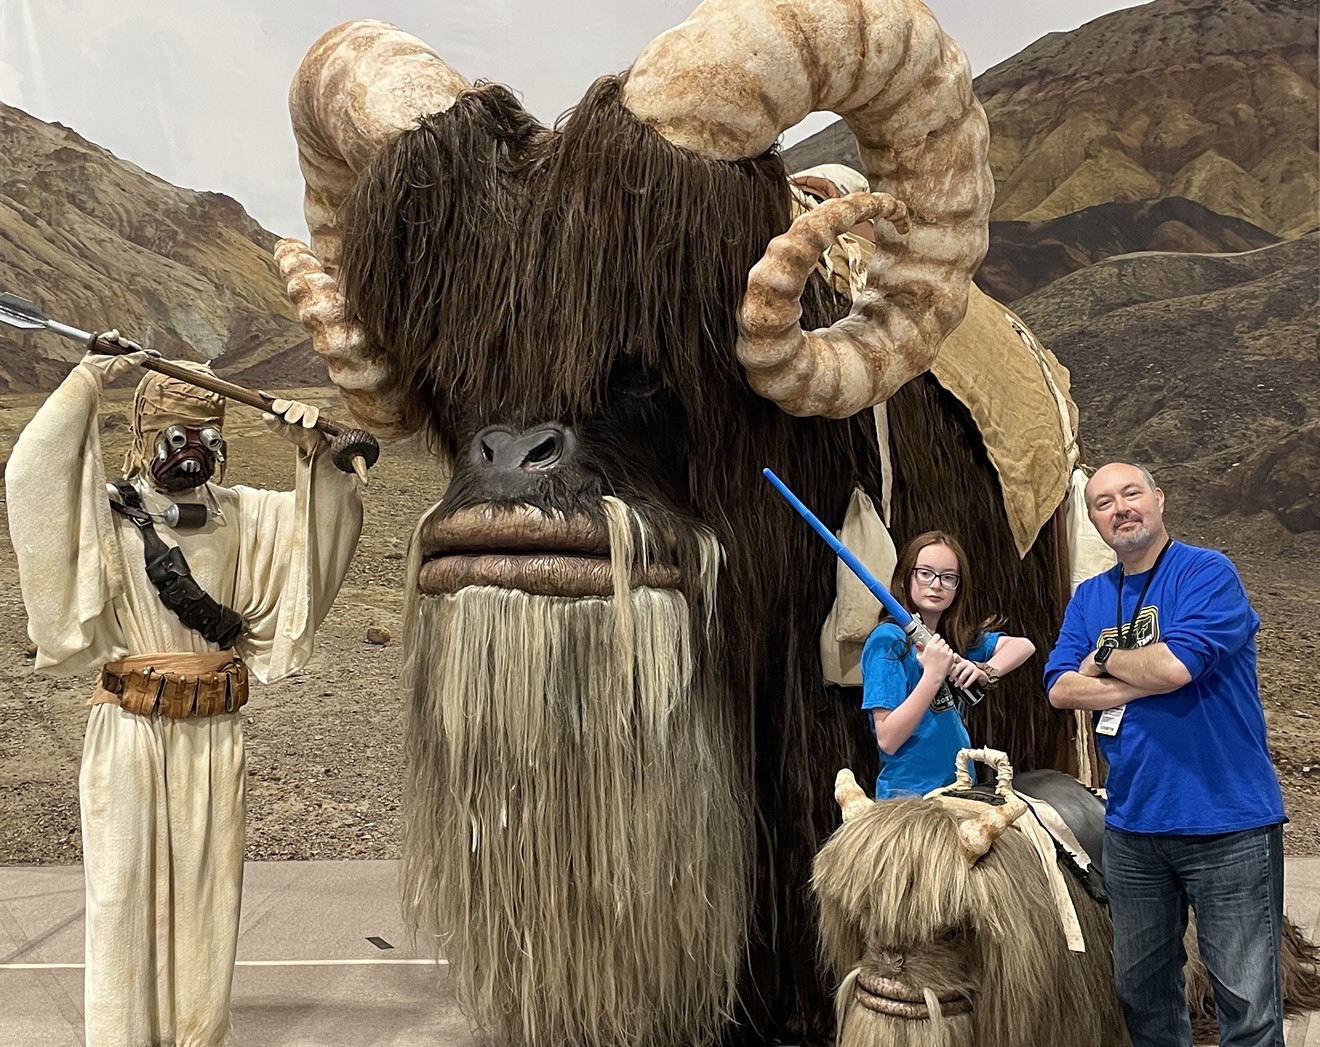 Michael Newman with his daughter at Denver Comic Con (with a Tusken Raider and banthas).